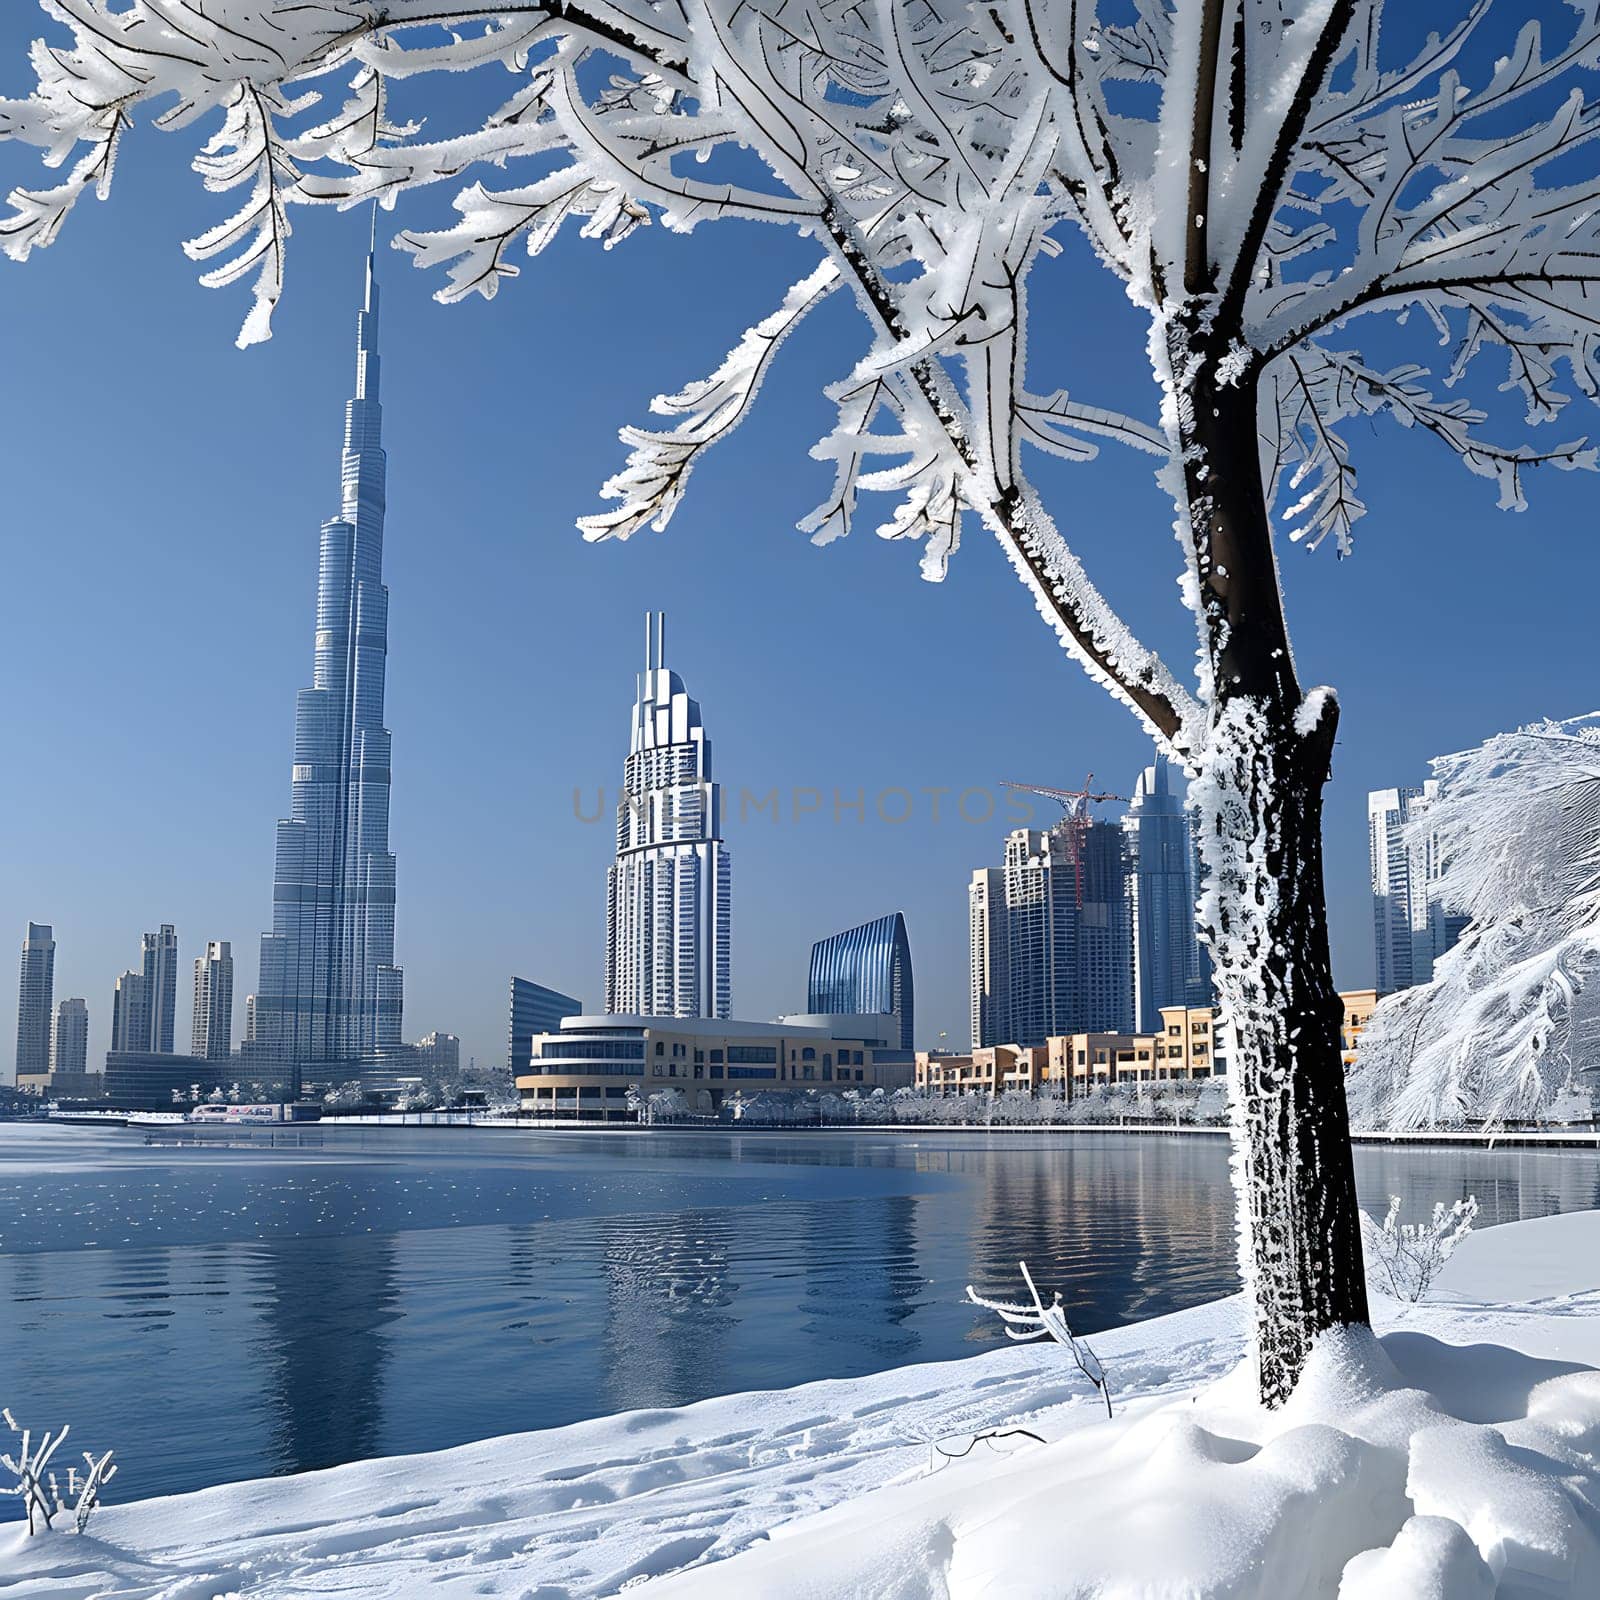 A serene winter morning in the snowy cityscape, with a majestic tree in the foreground. Skyscrapers tower in the background under the clear blue sky, creating a picturesque natural landscape